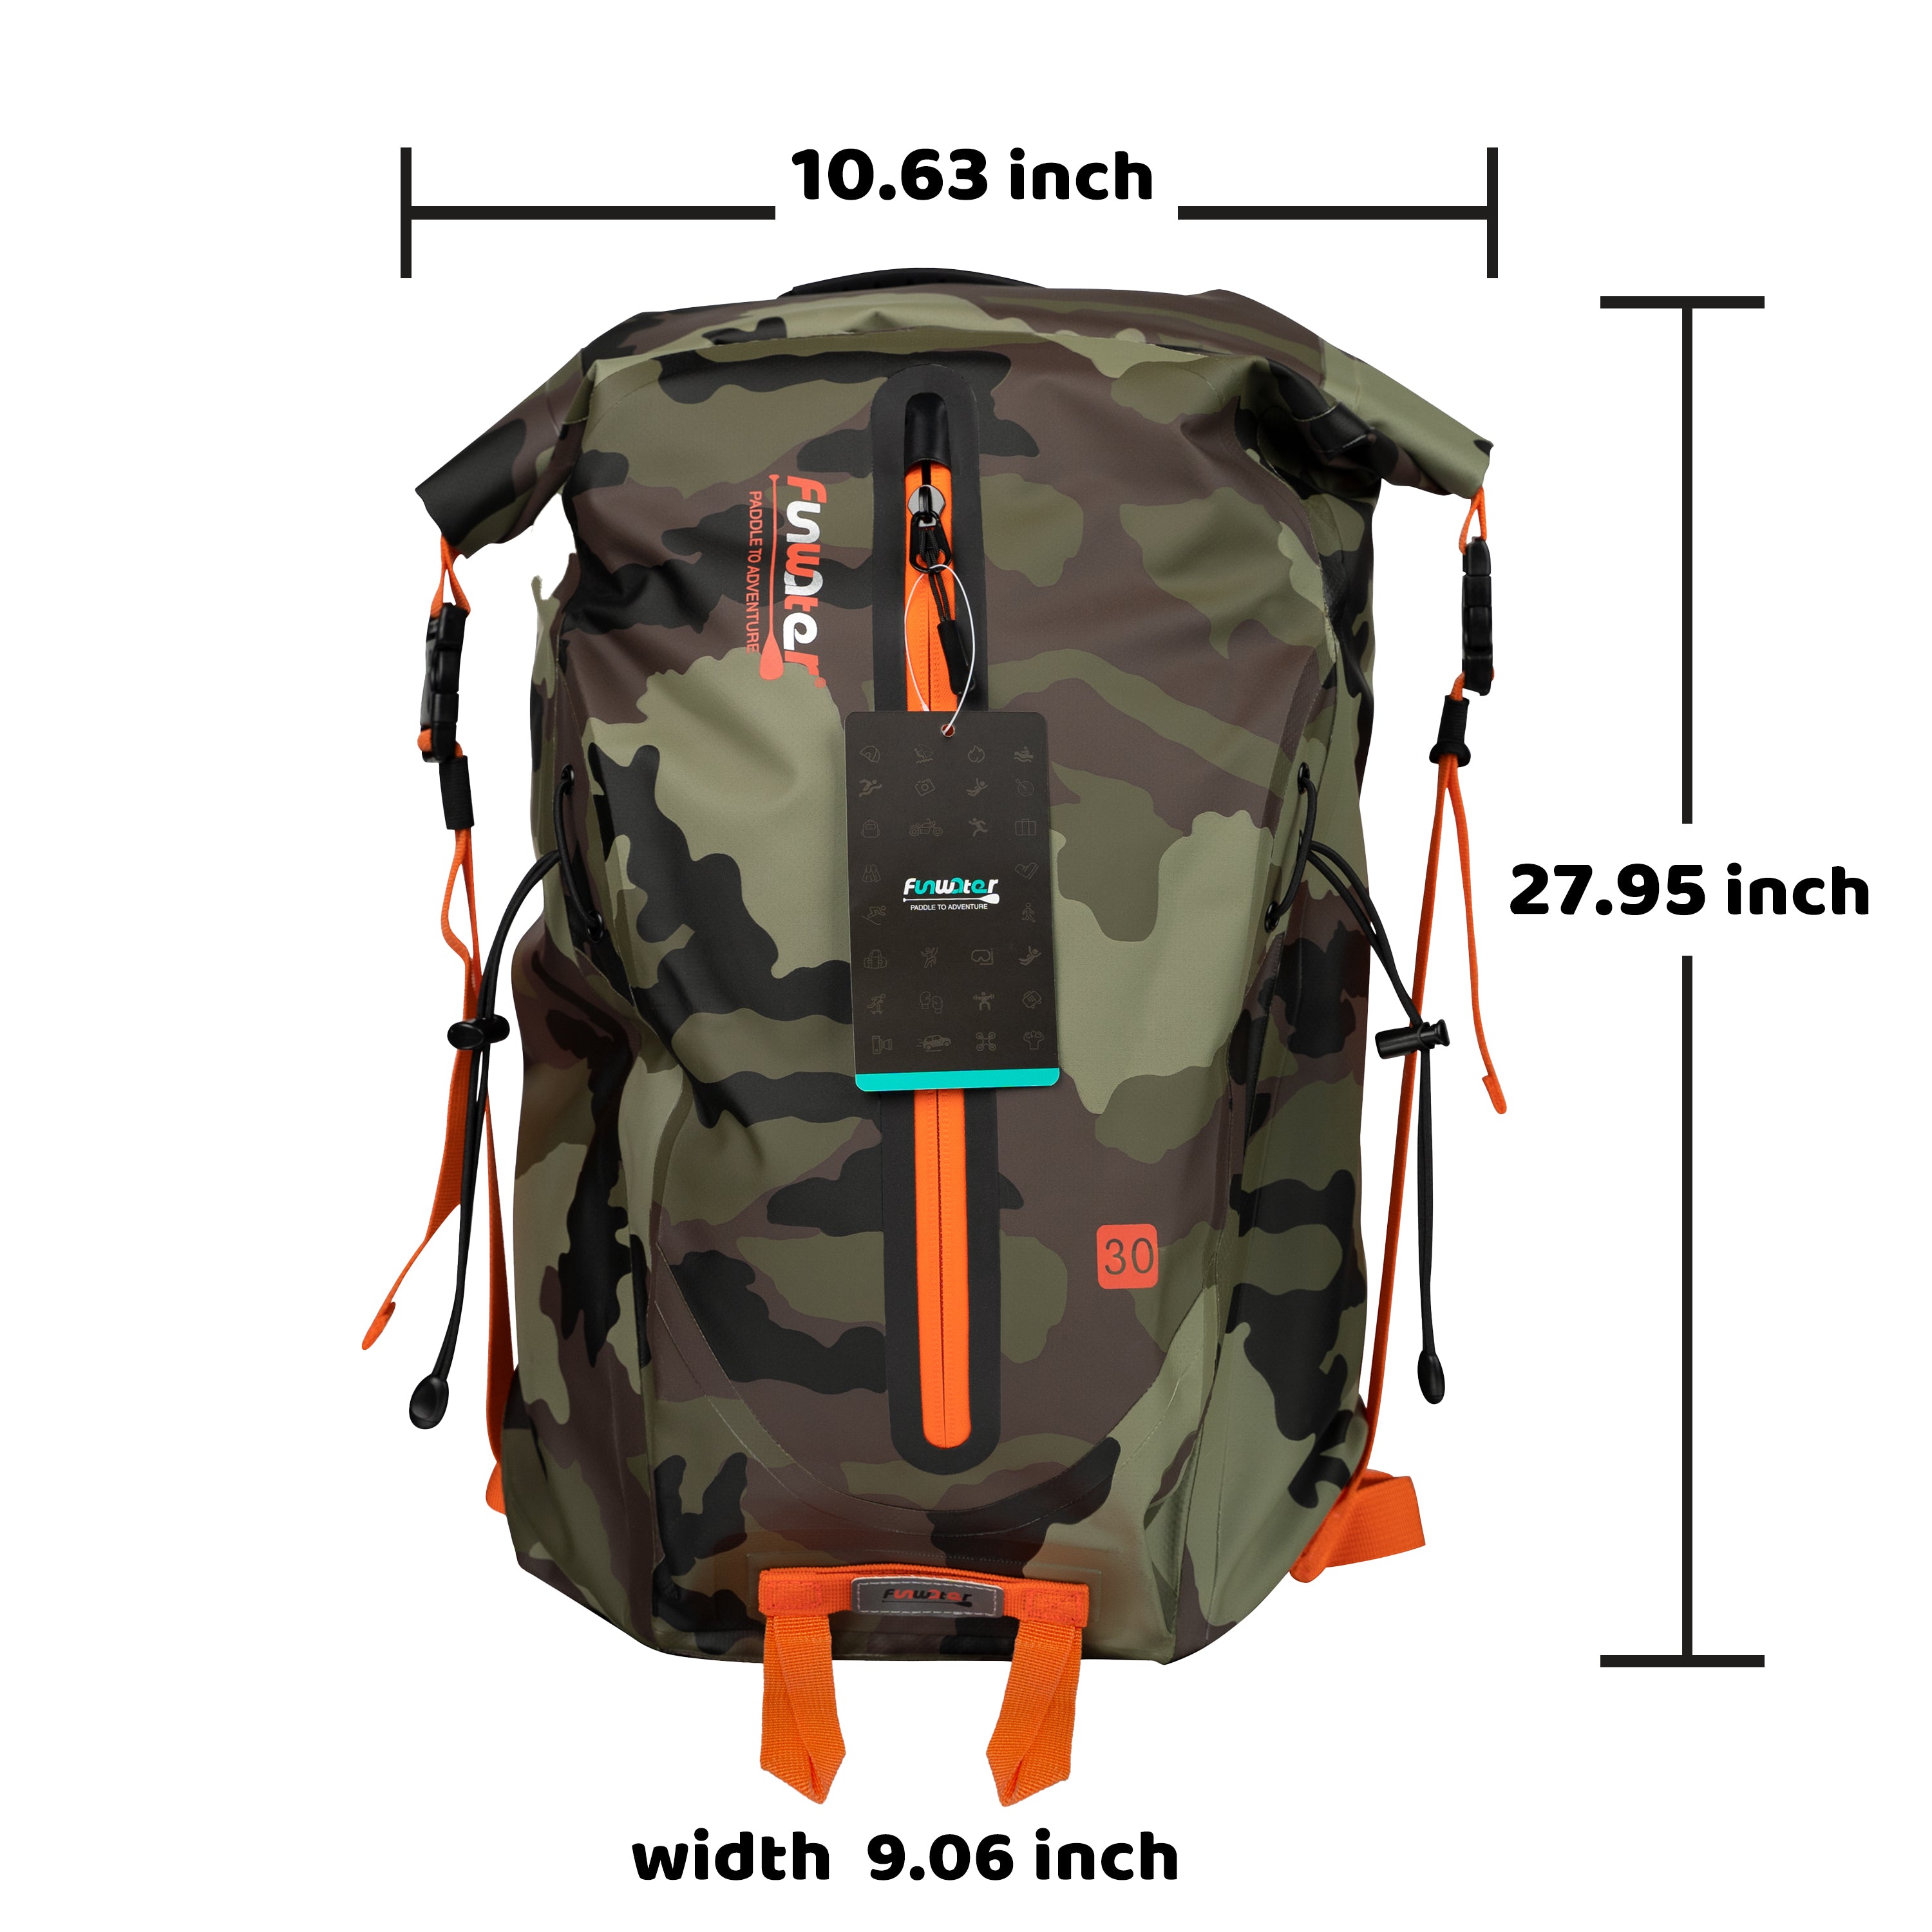 FunWater Waterproof Backpack Marine Dry Bag, 30L Floating Dry Backpack for Kayaking,Camping,Surfing,Boating,Hiking,Fishing